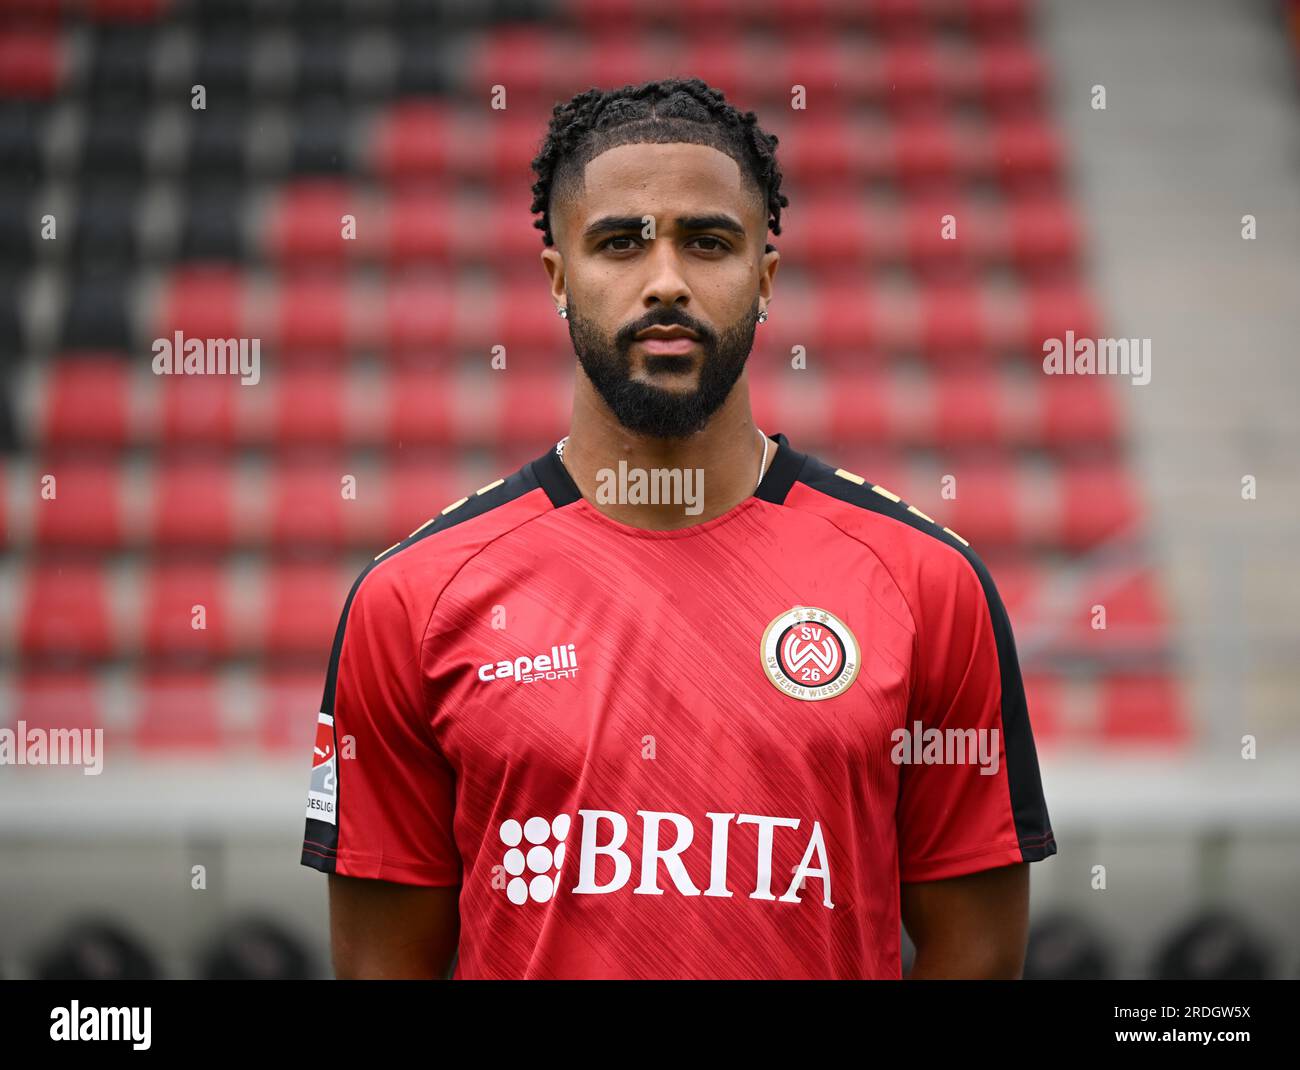 Wiesbaden, Germany. 21st July, 2023. Soccer, 2. Bundesliga, 2023/24 season, SV Wehen Wiesbaden photo session at the Brita Arena. Keanan Bennetts (11). Credit: Arne Dedert/dpa - IMPORTANT NOTE: In accordance with the requirements of the DFL Deutsche Fußball Liga and the DFB Deutscher Fußball-Bund, it is prohibited to use or have used photographs taken in the stadium and/or of the match in the form of sequence pictures and/or video-like photo series./dpa/Alamy Live News Stock Photo